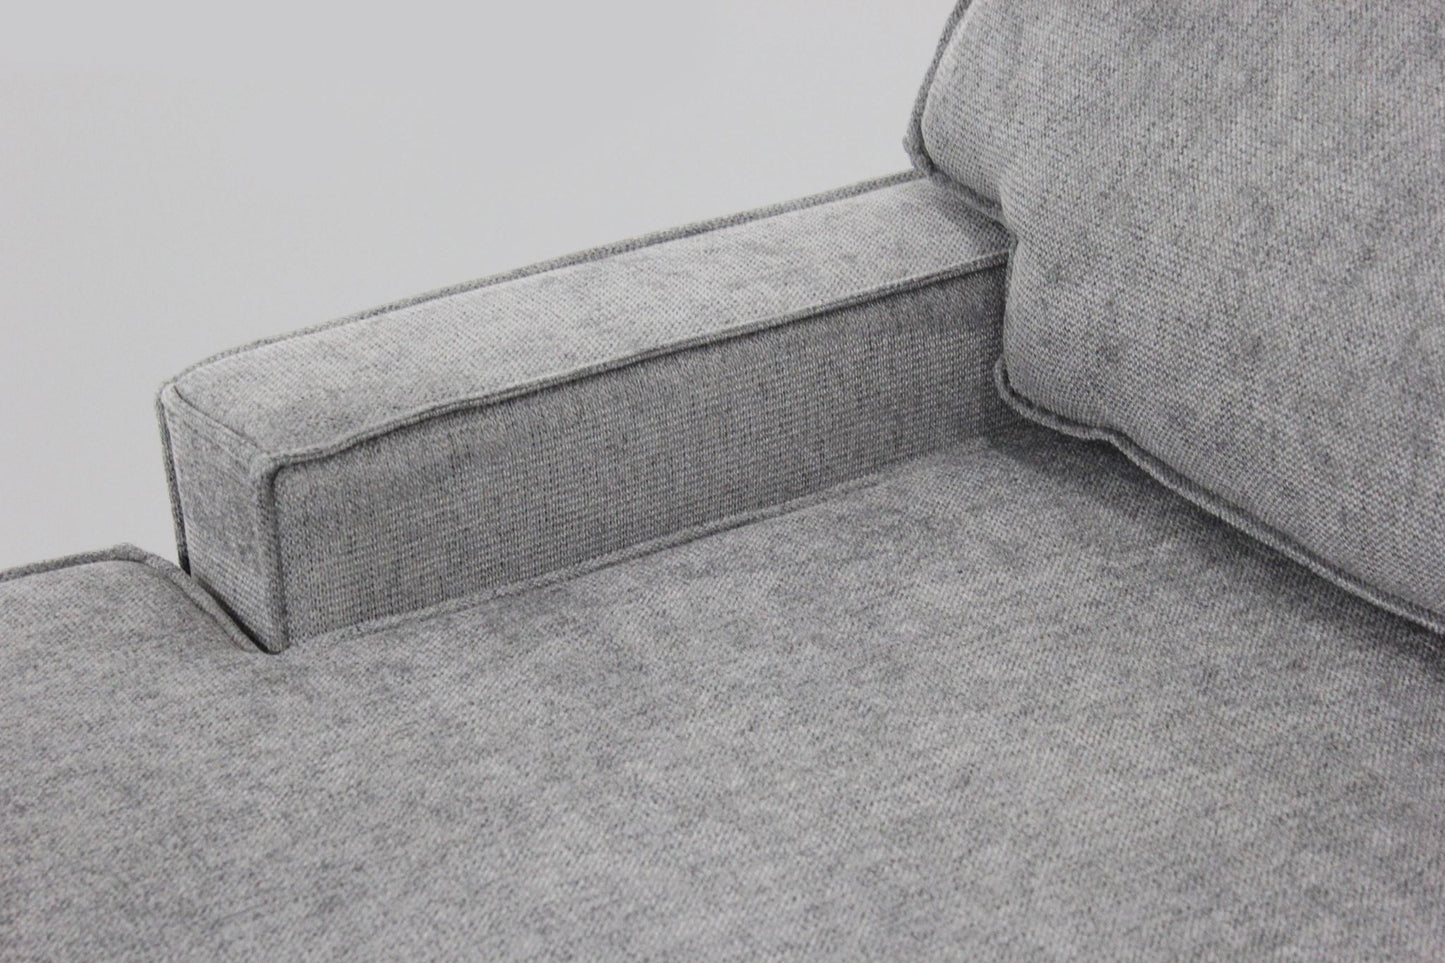 Merry Sofa Bed Grey (Right & Left side)